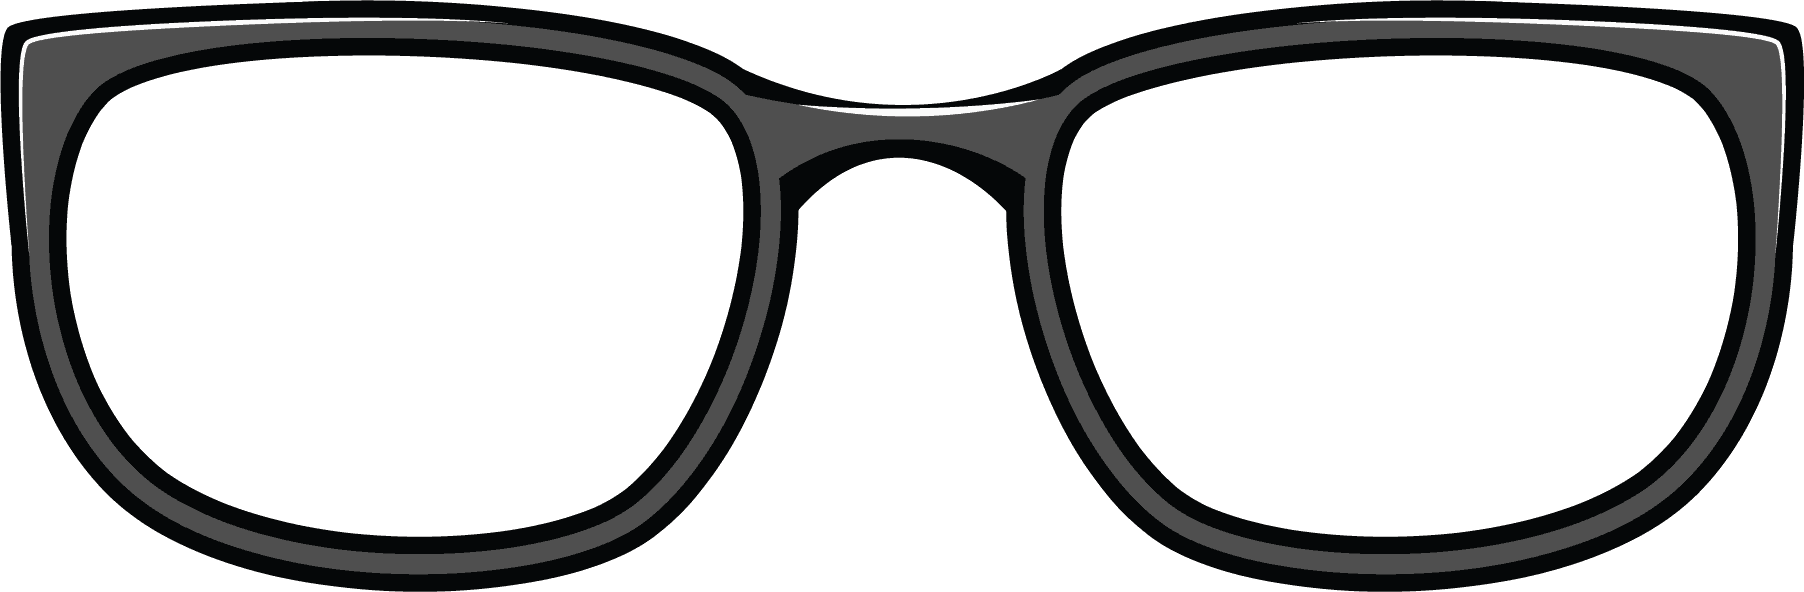 Free Glasses Clipart Transparent, Download Free Glasses Clipart ...